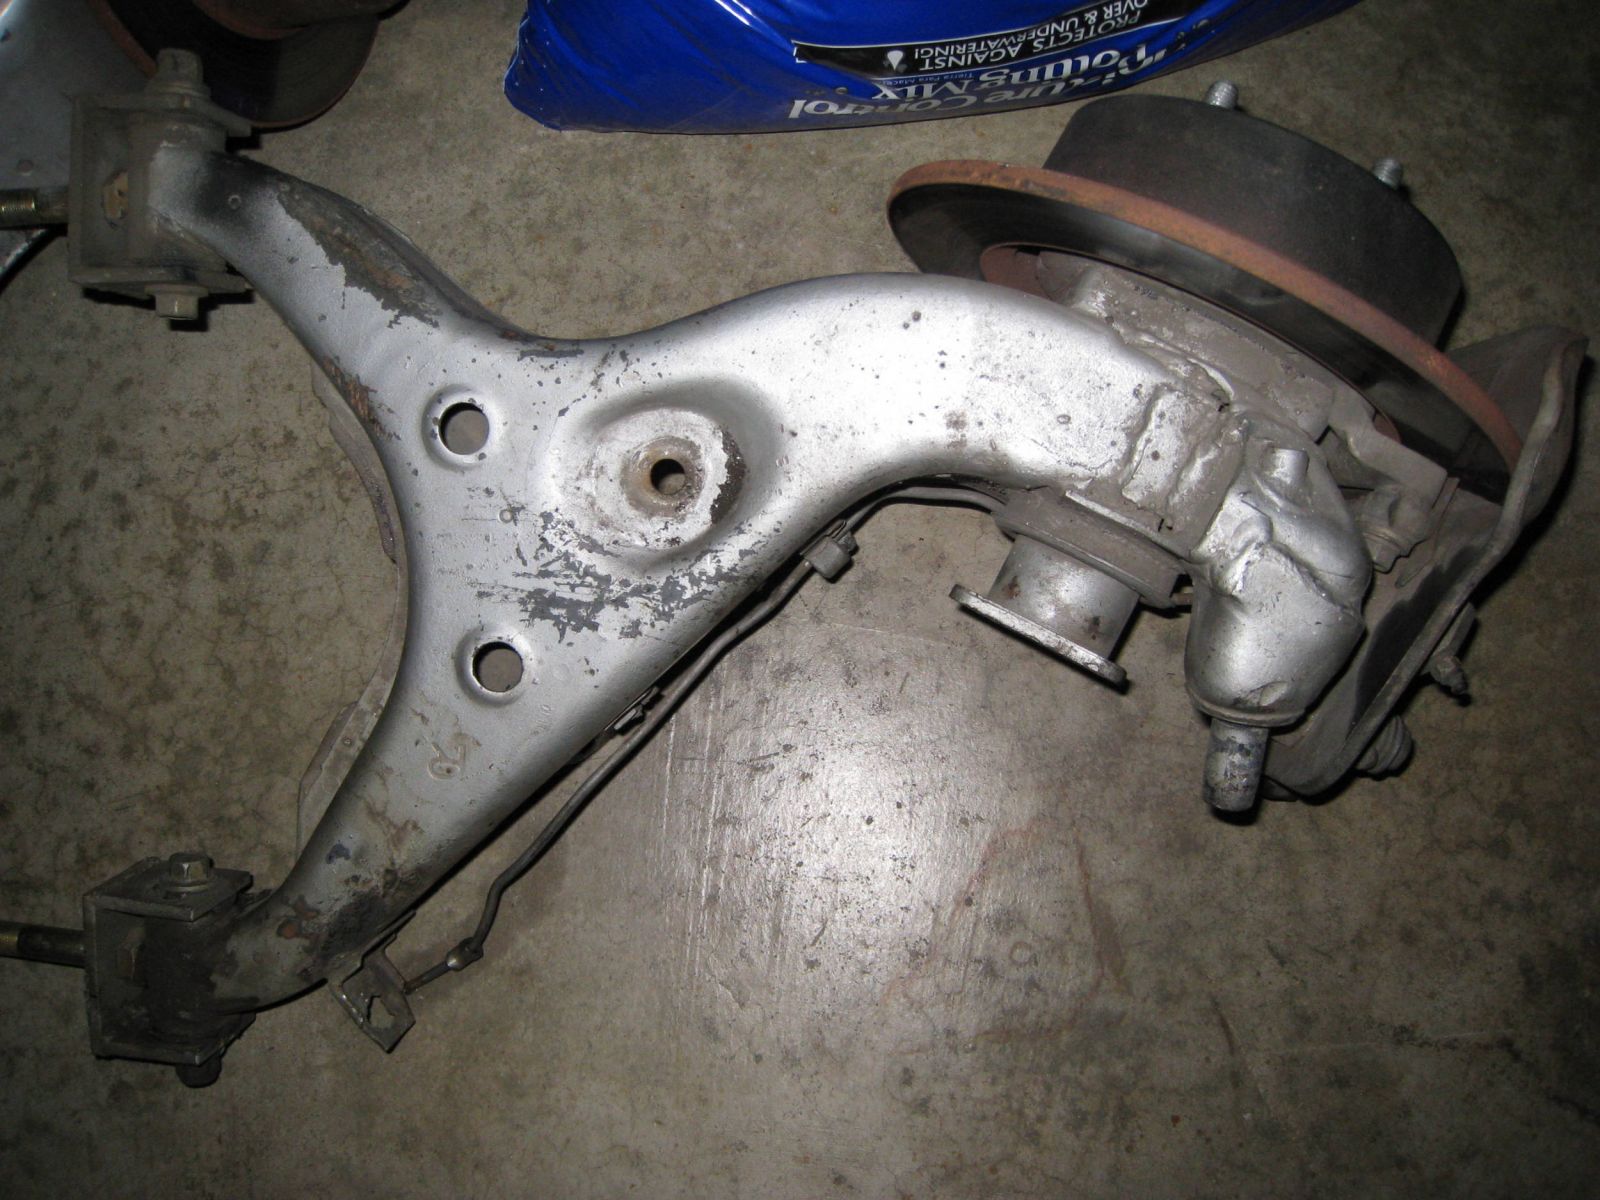 1980 Maxima vs 280zx rear control arms under the Strutless Wonder